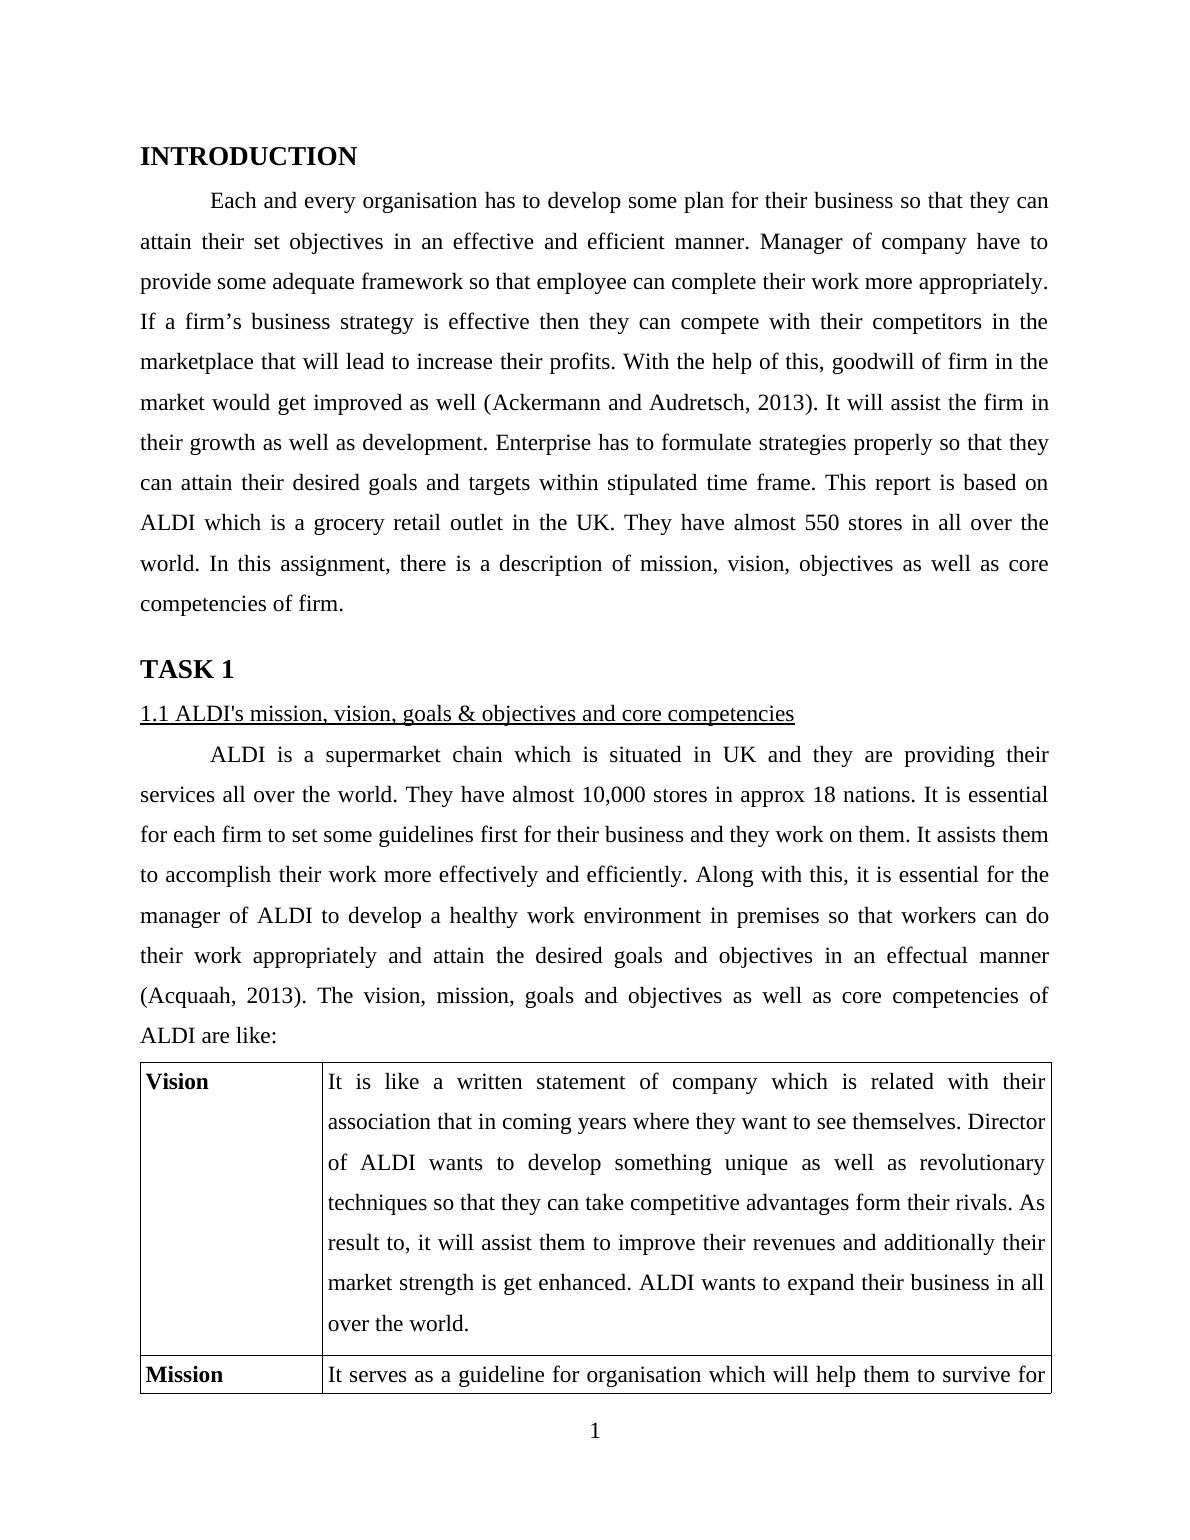 Report on Business Strategy of ALDI company - doc_4